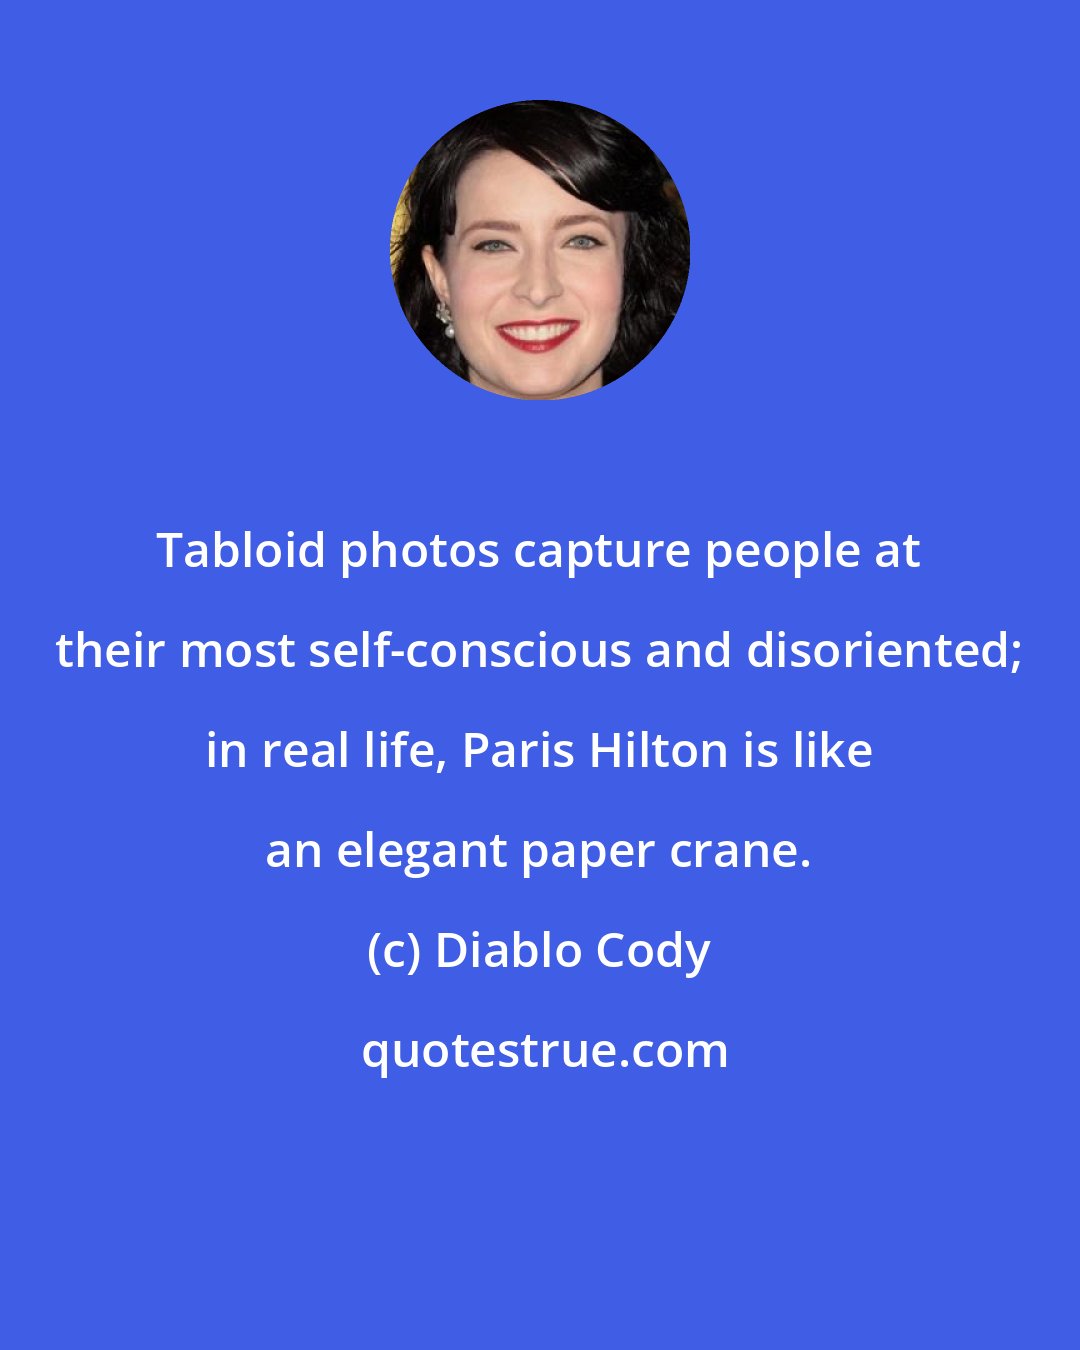 Diablo Cody: Tabloid photos capture people at their most self-conscious and disoriented; in real life, Paris Hilton is like an elegant paper crane.